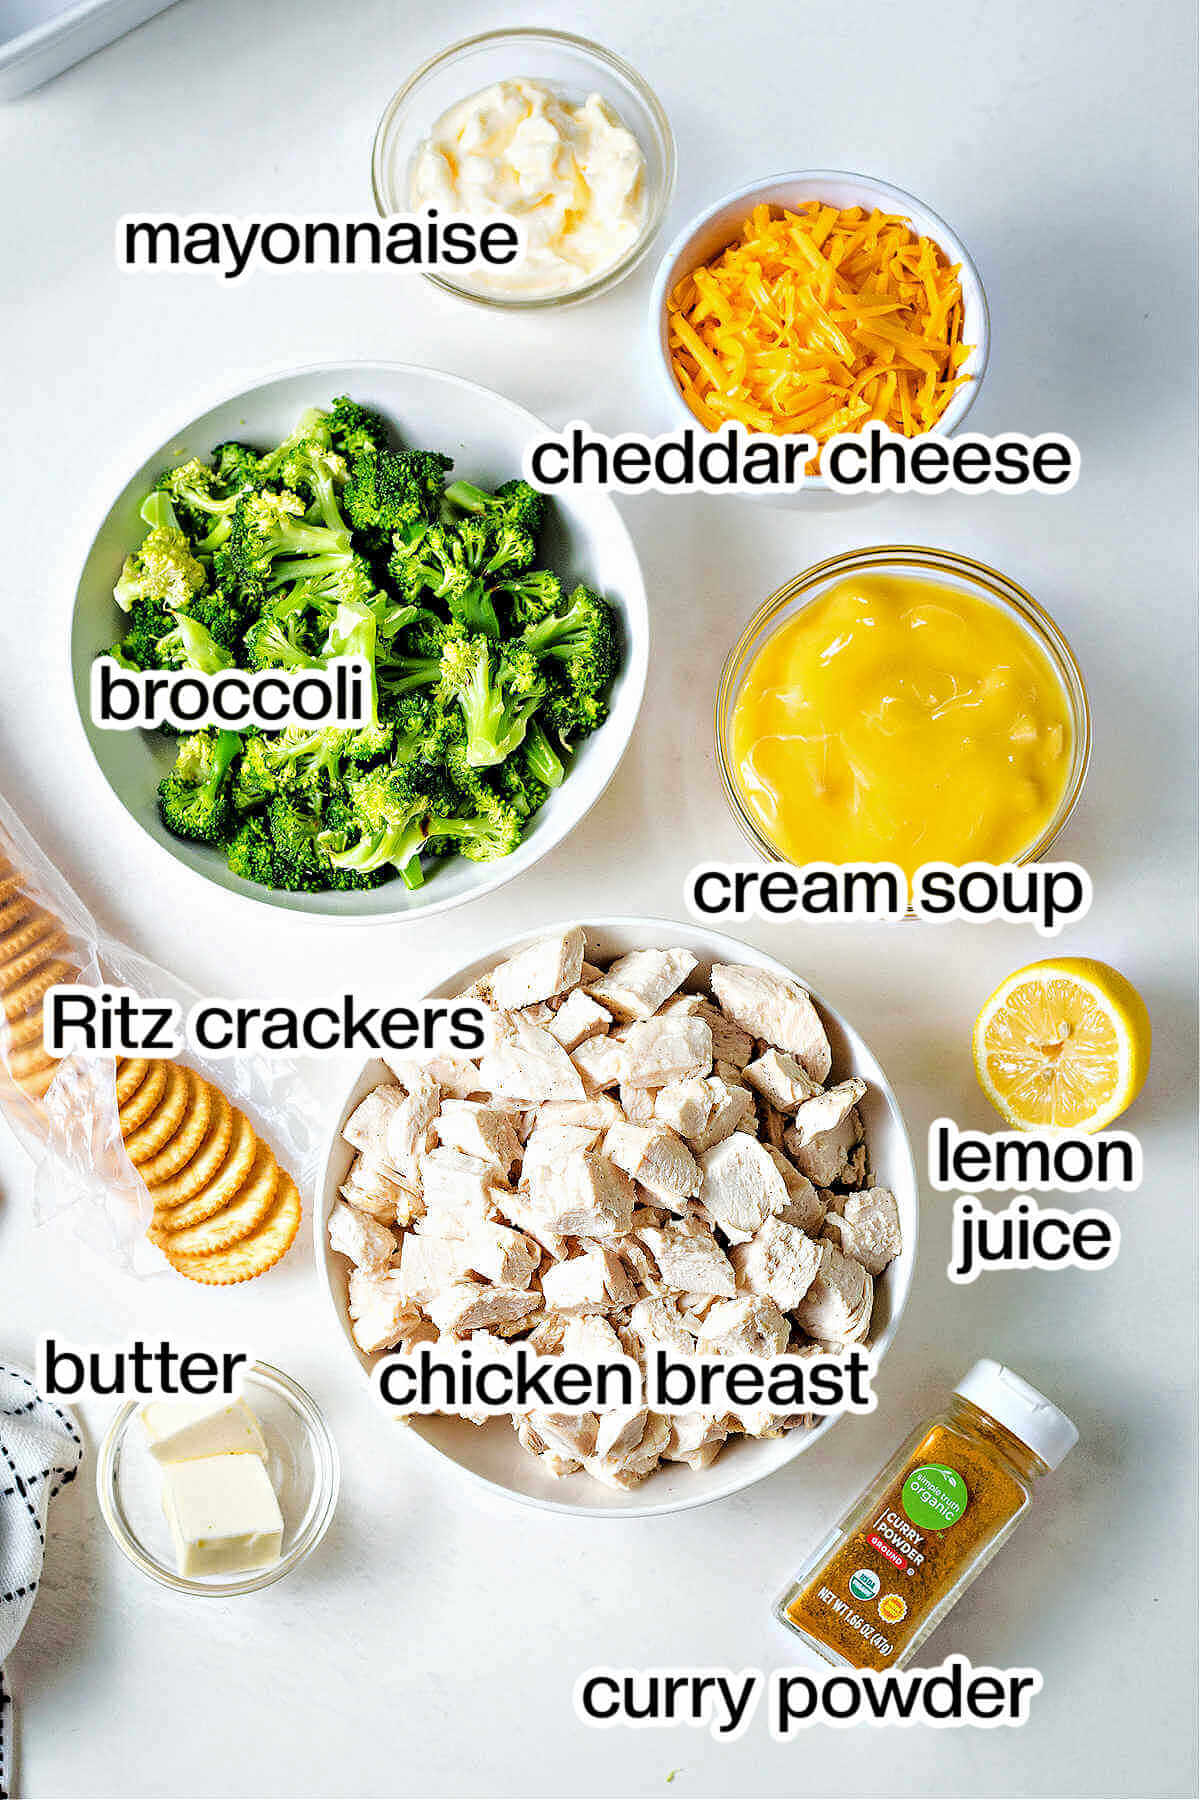 Ingredients for chicken broccoli casserole on a table.